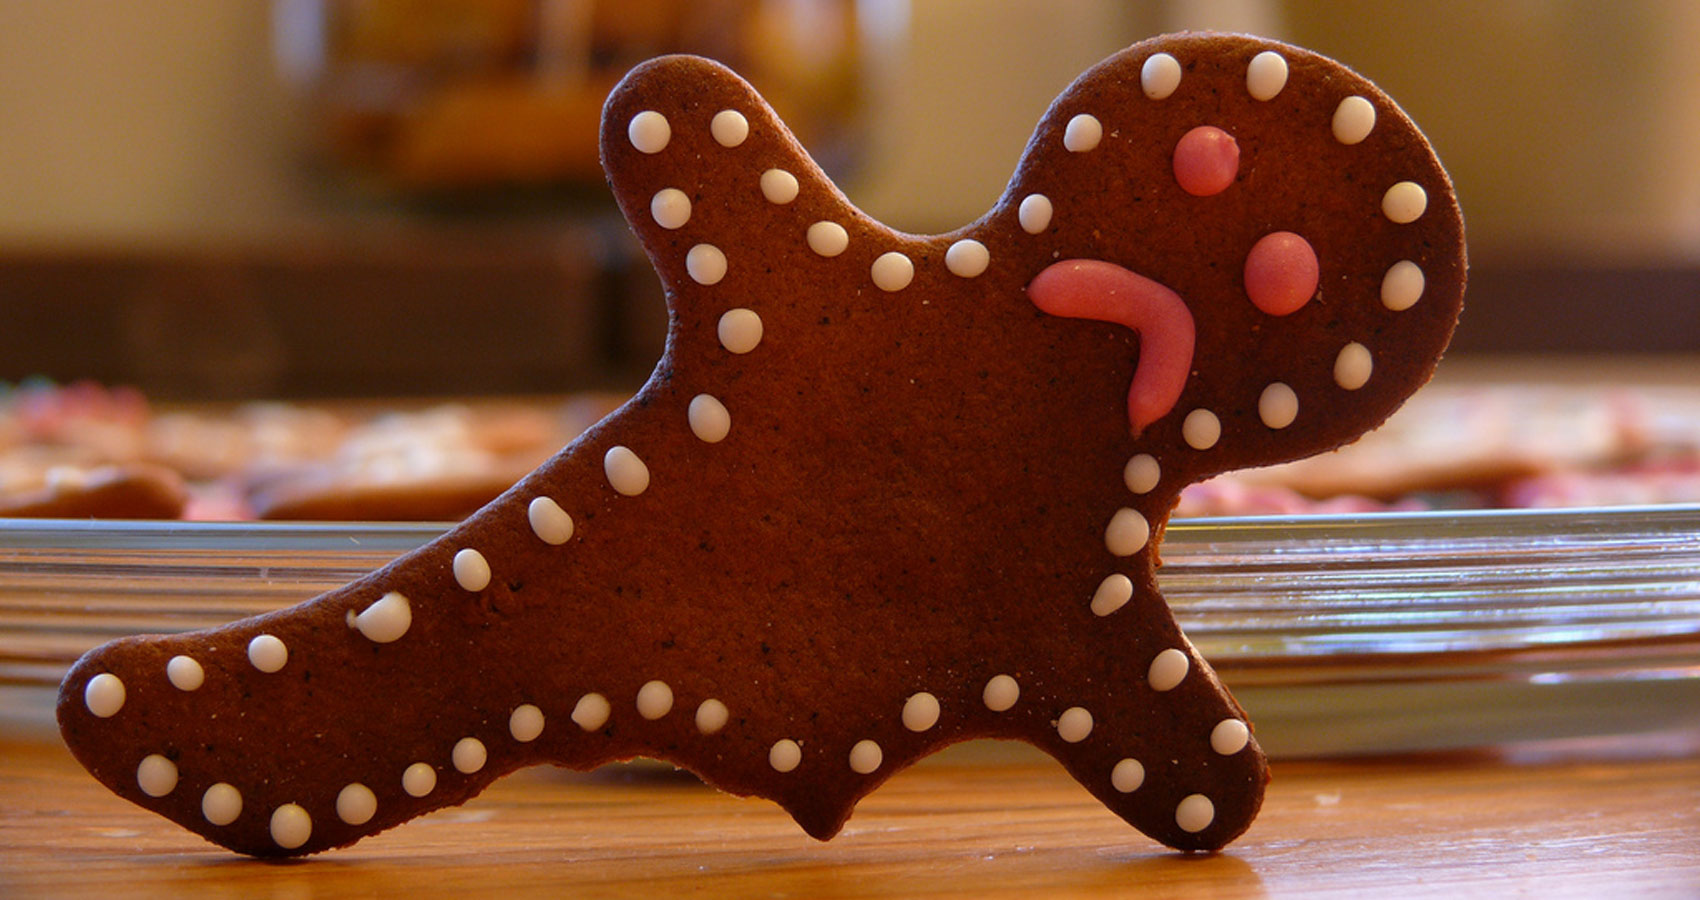 Gingerbread Man written by Lana Wesley at Spillwords.com